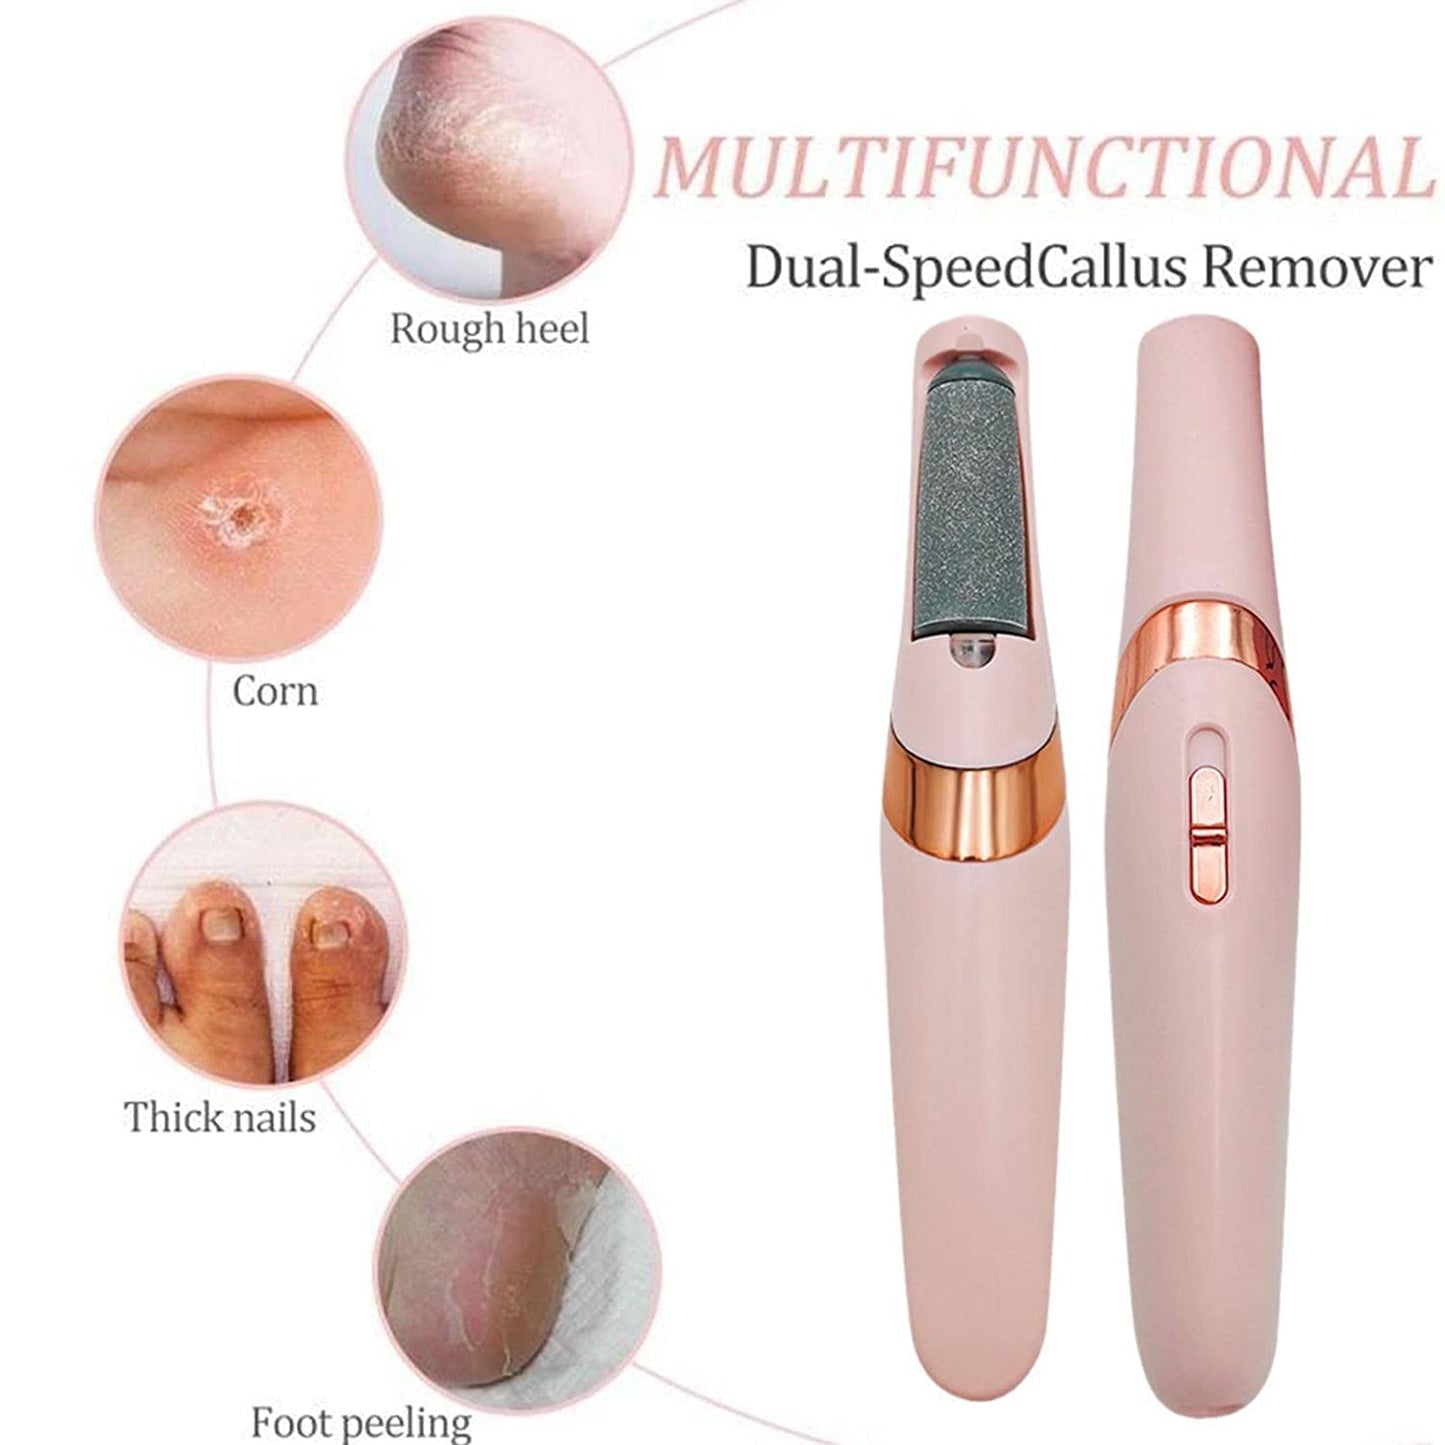 Callus Remover Rechargeable Pedicure Tool for Dead Skin |Foot Roller Callus Remover Hard and Dead Skin Remover |Feet Care Callus Remover | Pedicure for Hard Cracked Skin, Foot Scrubber Roller